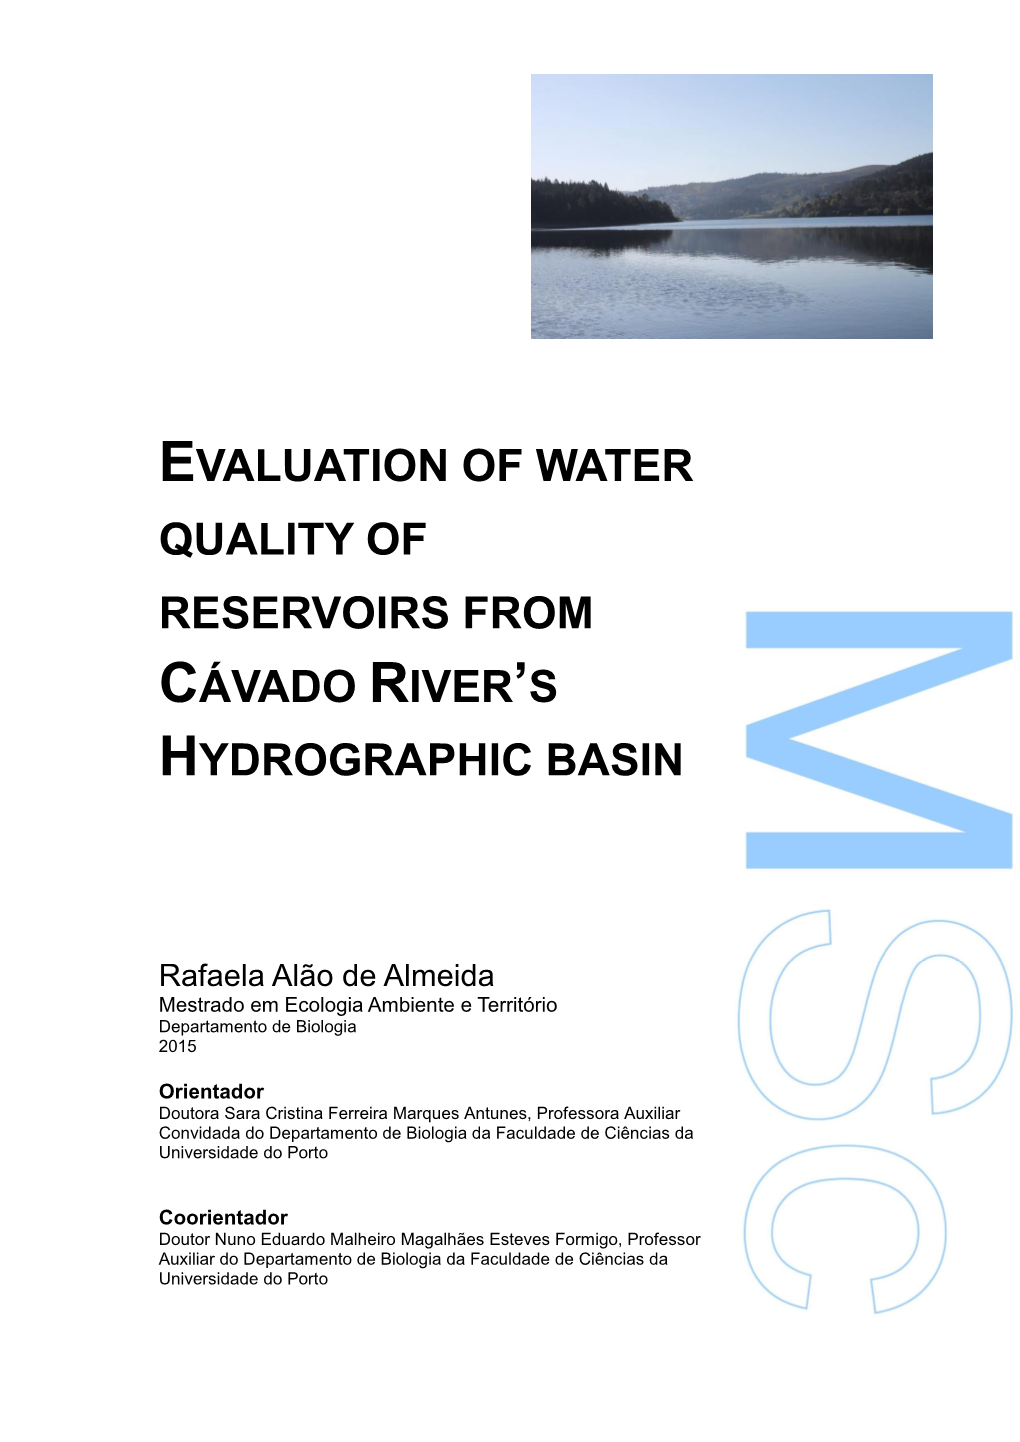 Evaluation of Water Quality of Reservoirs from Cávado River’S Hydrographic Basin